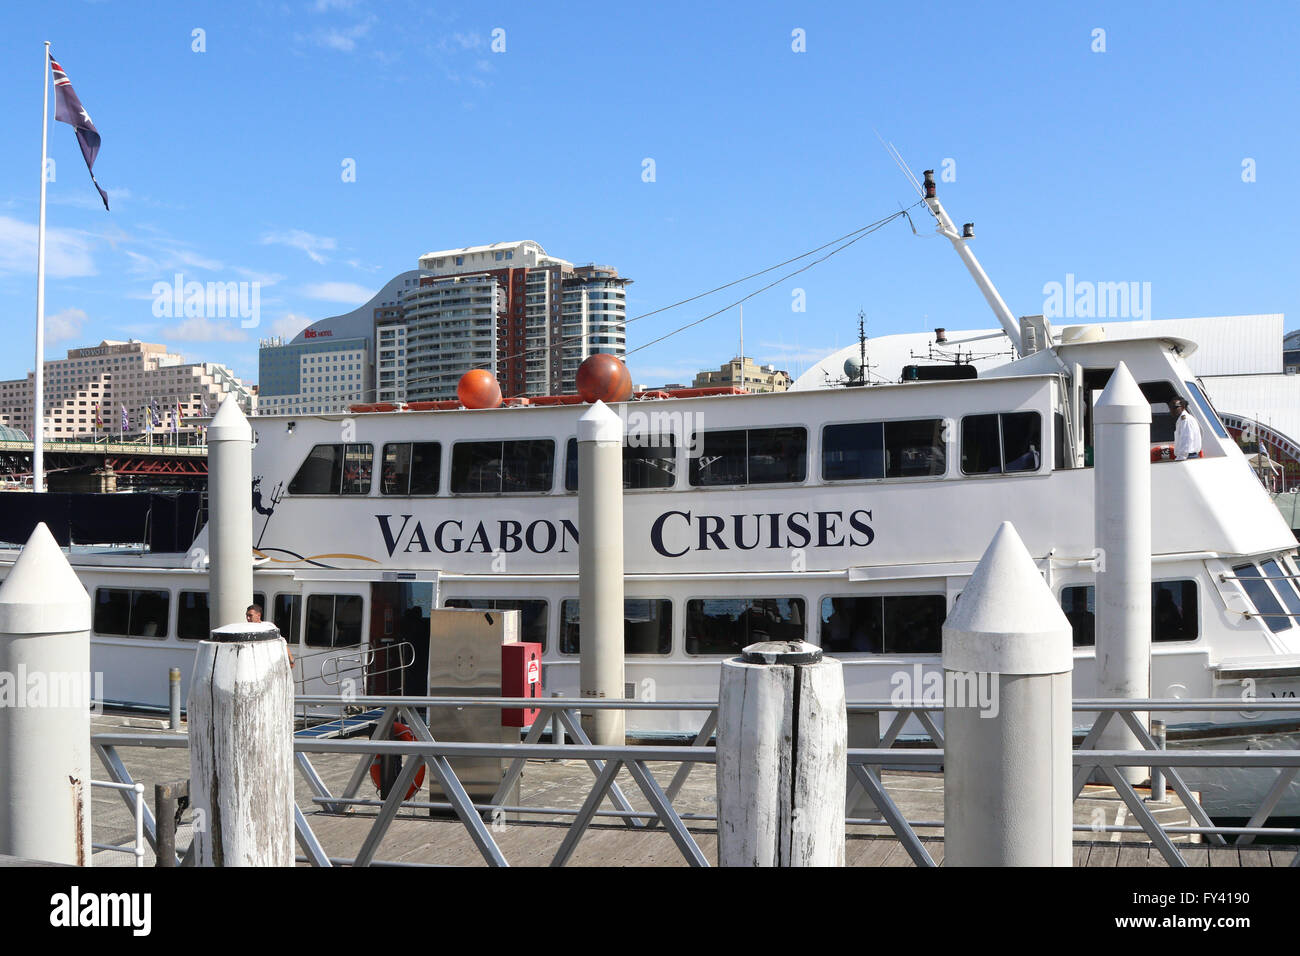 Sydney, Australia. 21 April 2016. The Australian Monarchist League organised a celebratory luncheon cruise in honour of Queen Elizabeth II’s 90th birthday, which takes place on the same day. The cruise departed Kings Street Wharf, Darling Harbour onboard Vagabond. Credit: Richard Milnes/Alamy Live News Stock Photo